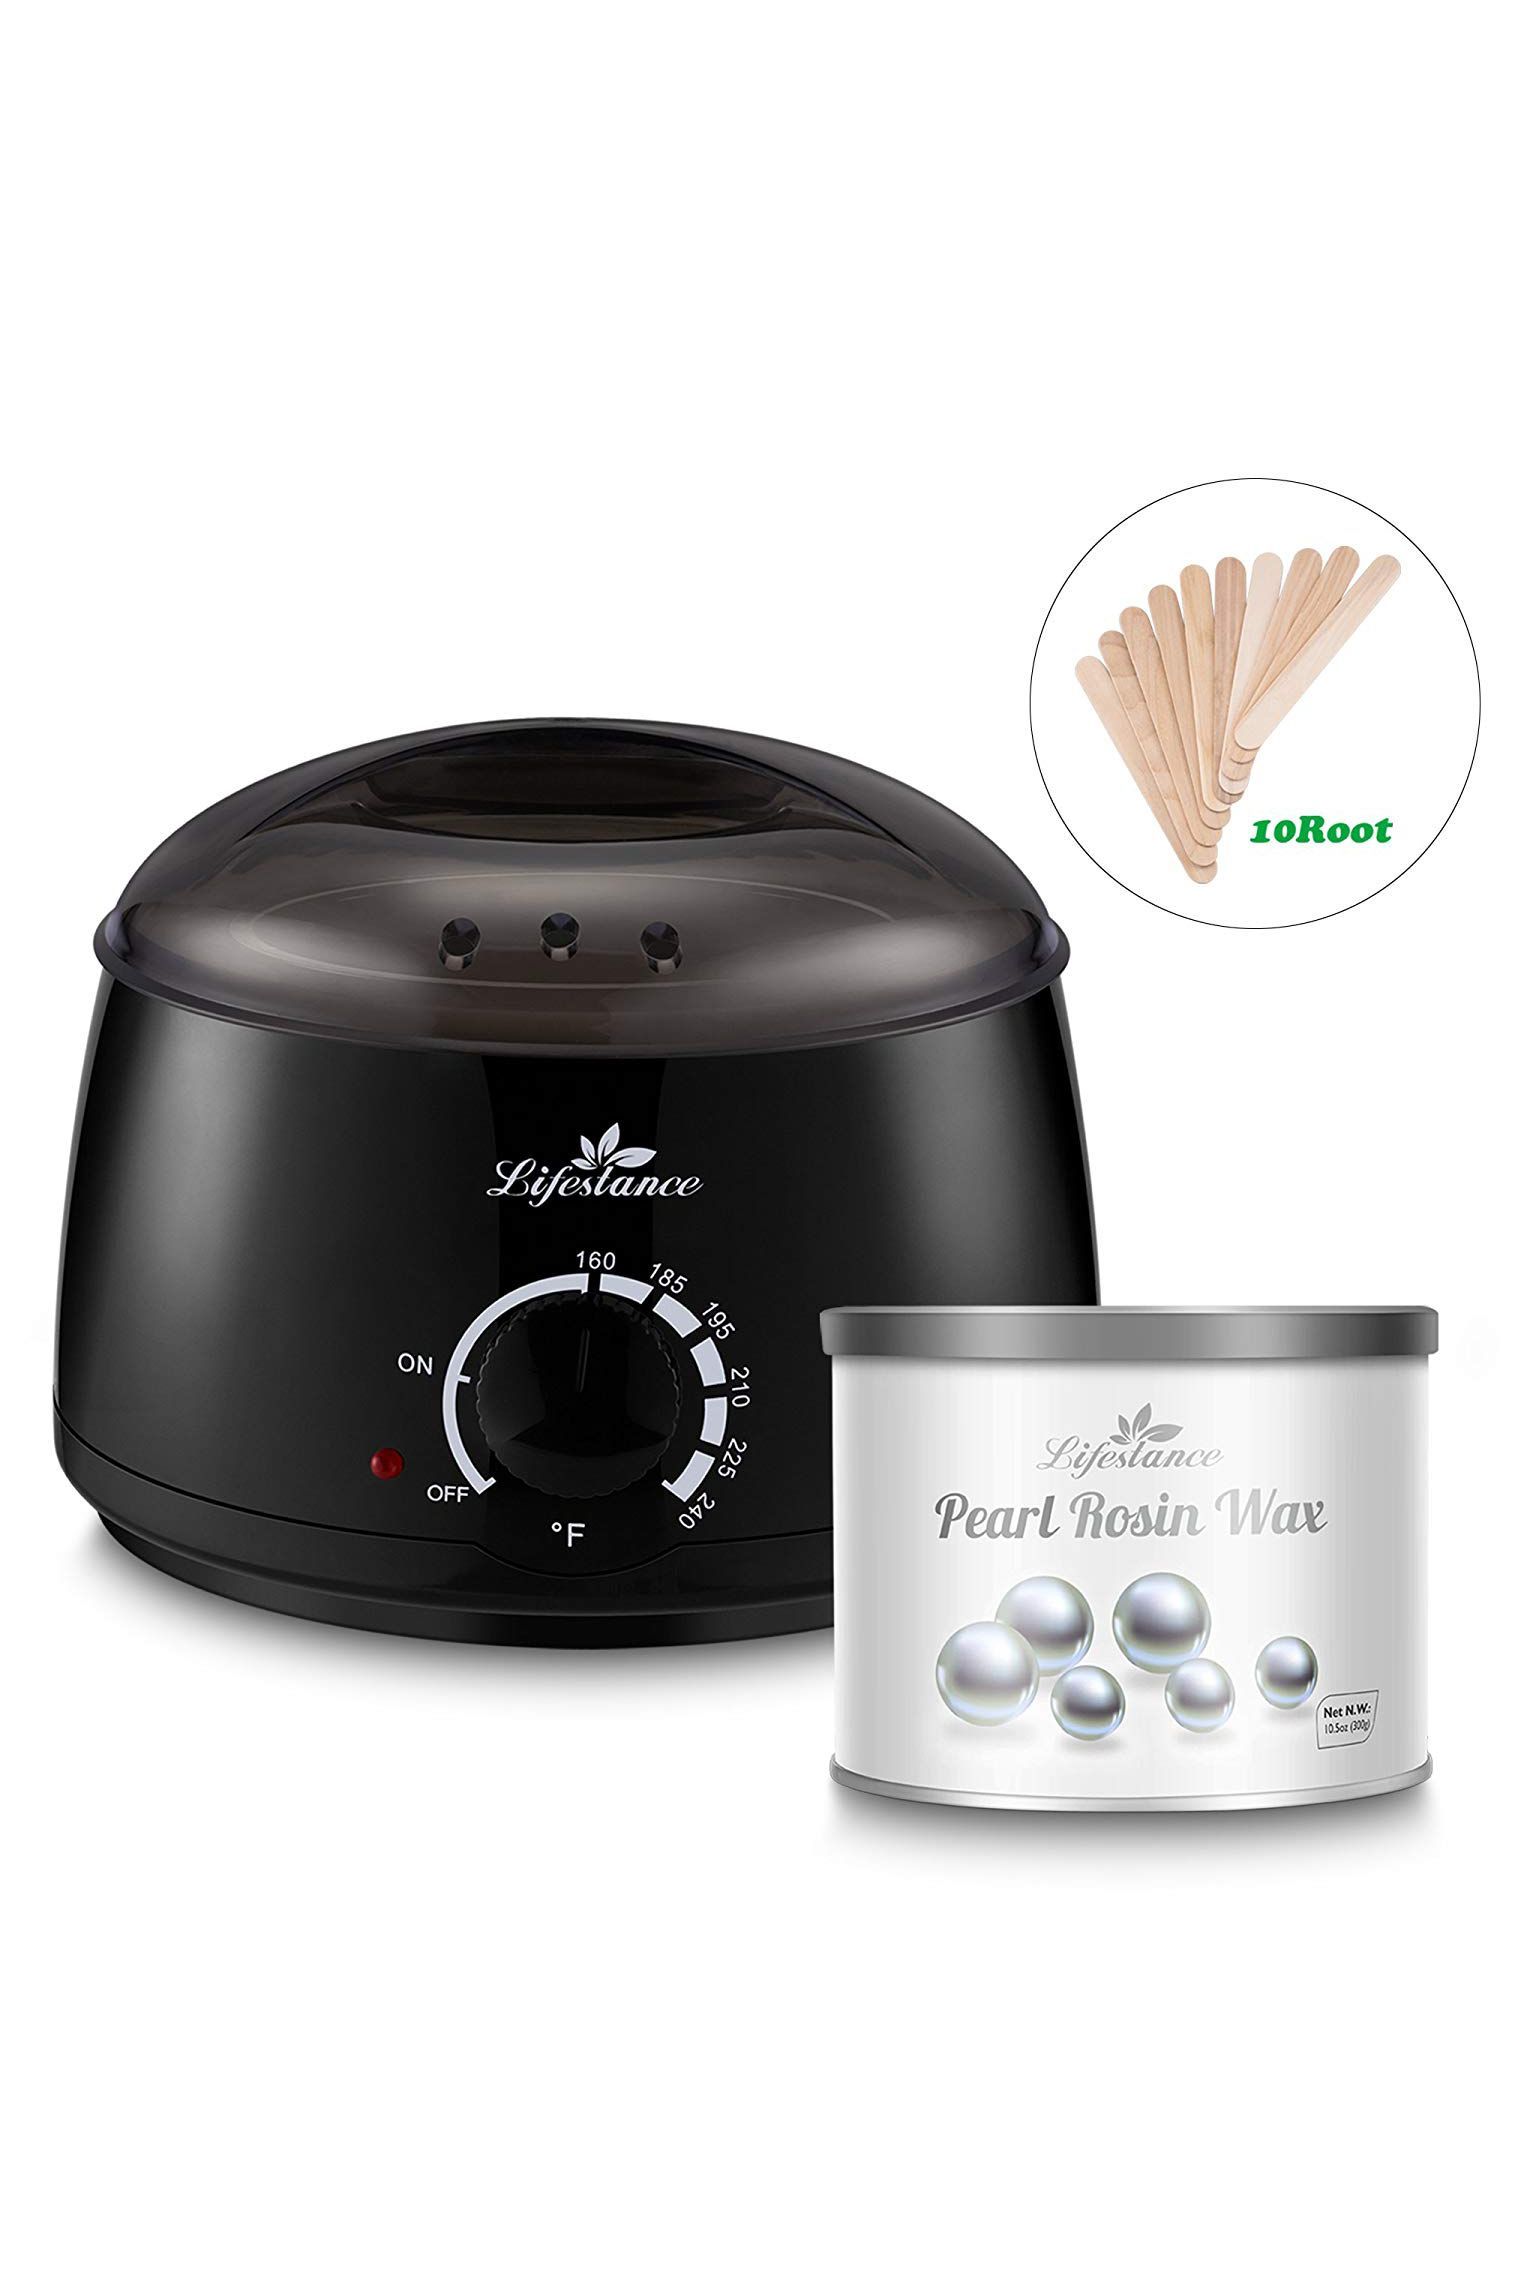 Lifestance Wax Warmer Hair Removal Kit with Hard Wax Beans and Wax Applicator Sticks